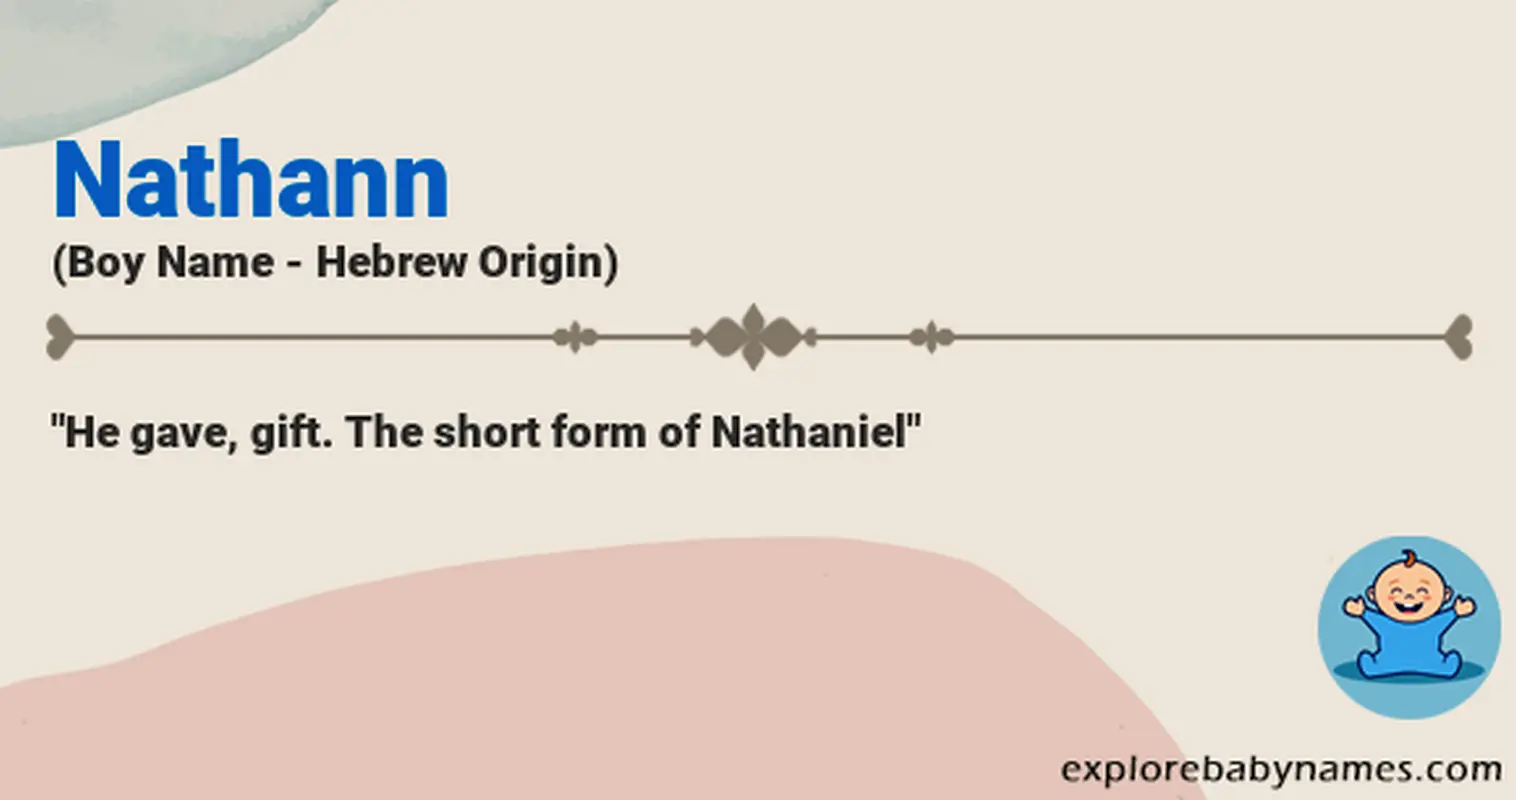 Meaning of Nathann